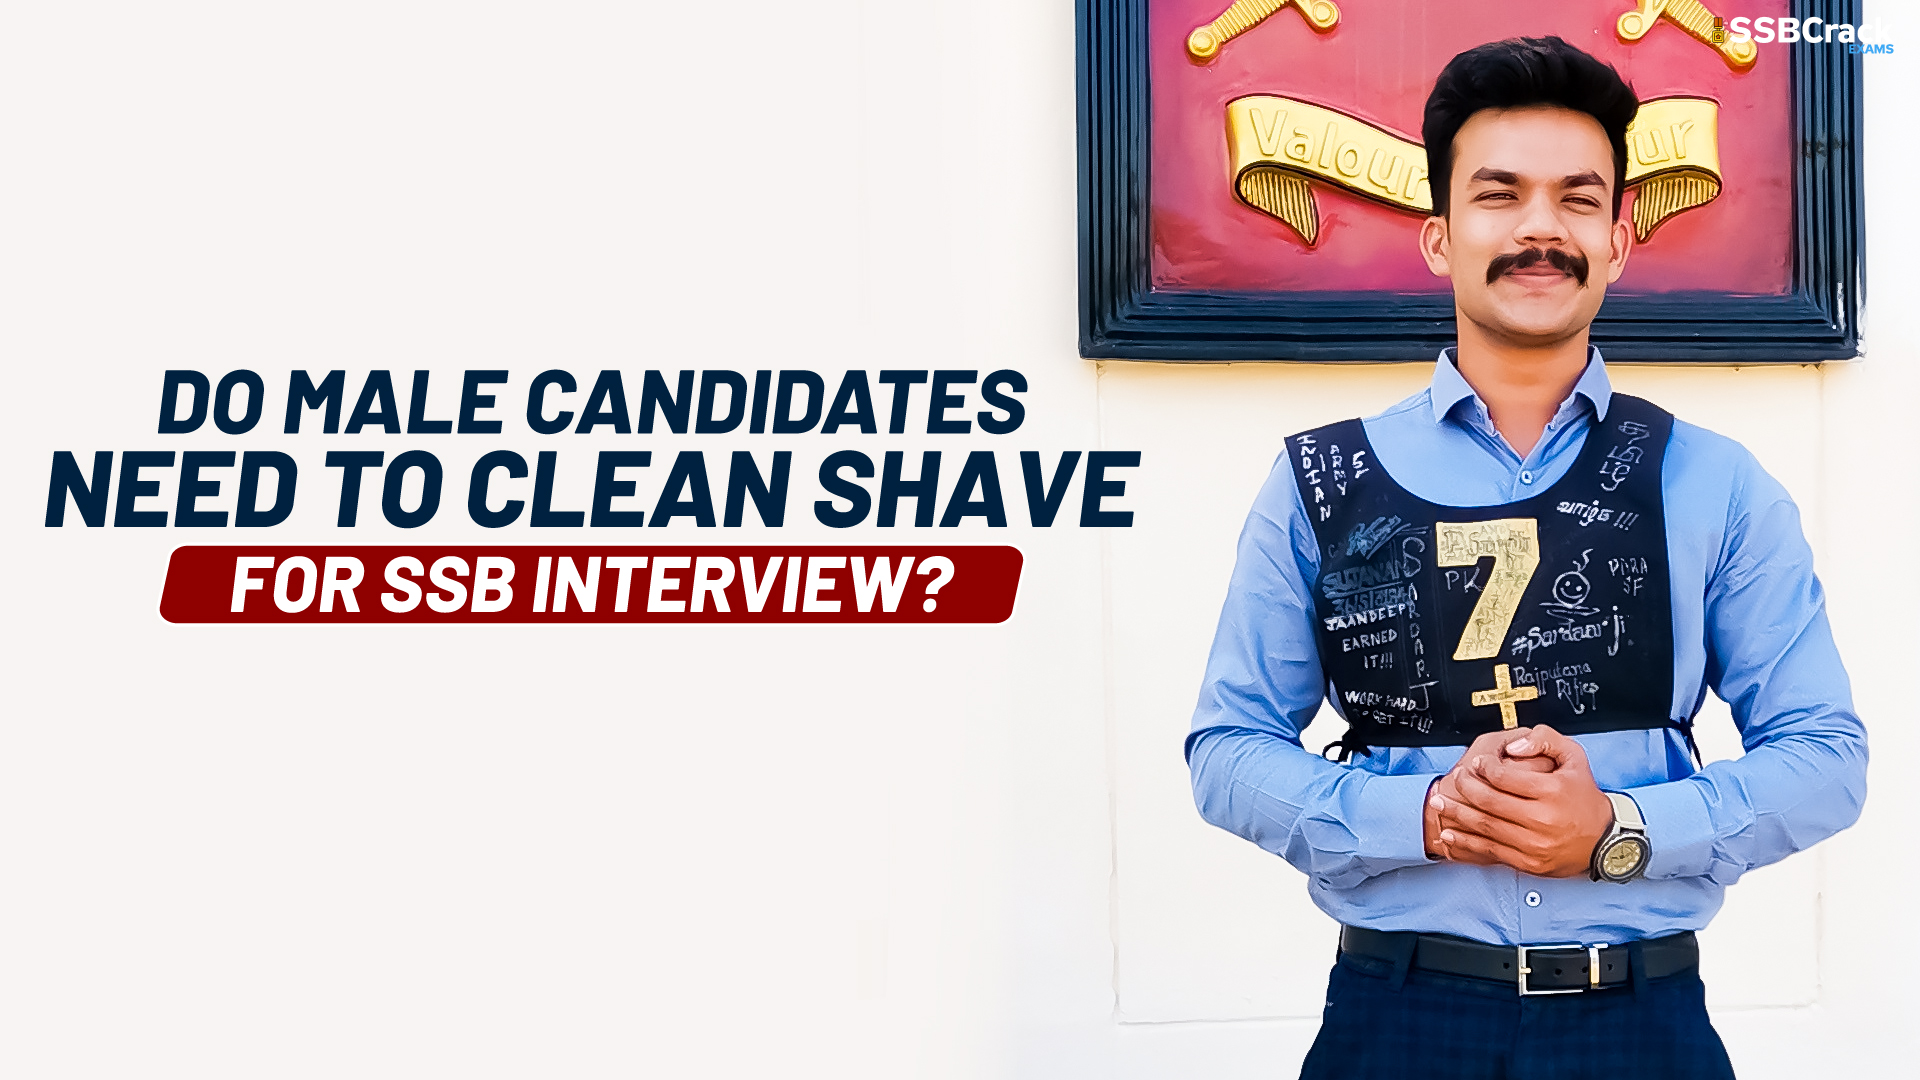 Do Male Candidates Need To Clean Shave For SSB Interview?